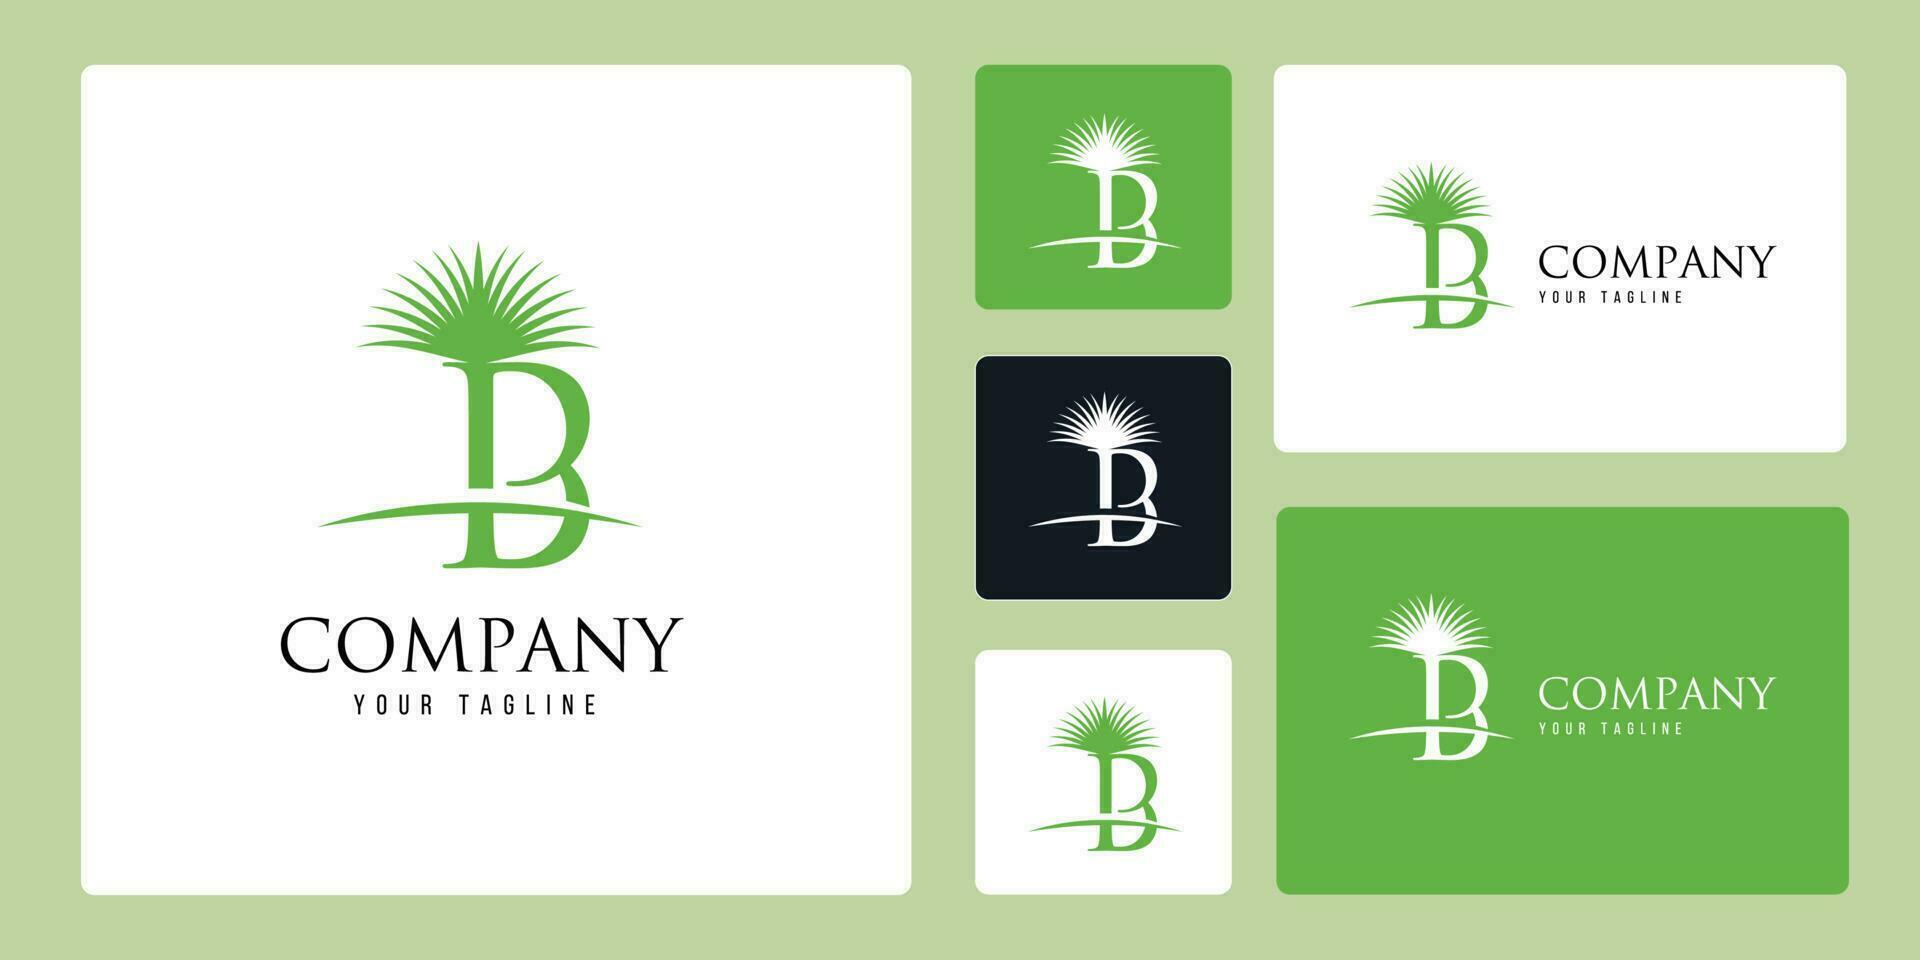 The Logo With The Theme Combination Of Palm Trees And The Letter B With Green Color Symbolizes Coolness. Suitable for use by Companies Engaged in Palm Oil, Lodging, Resorts, Beaches, and Others. vector